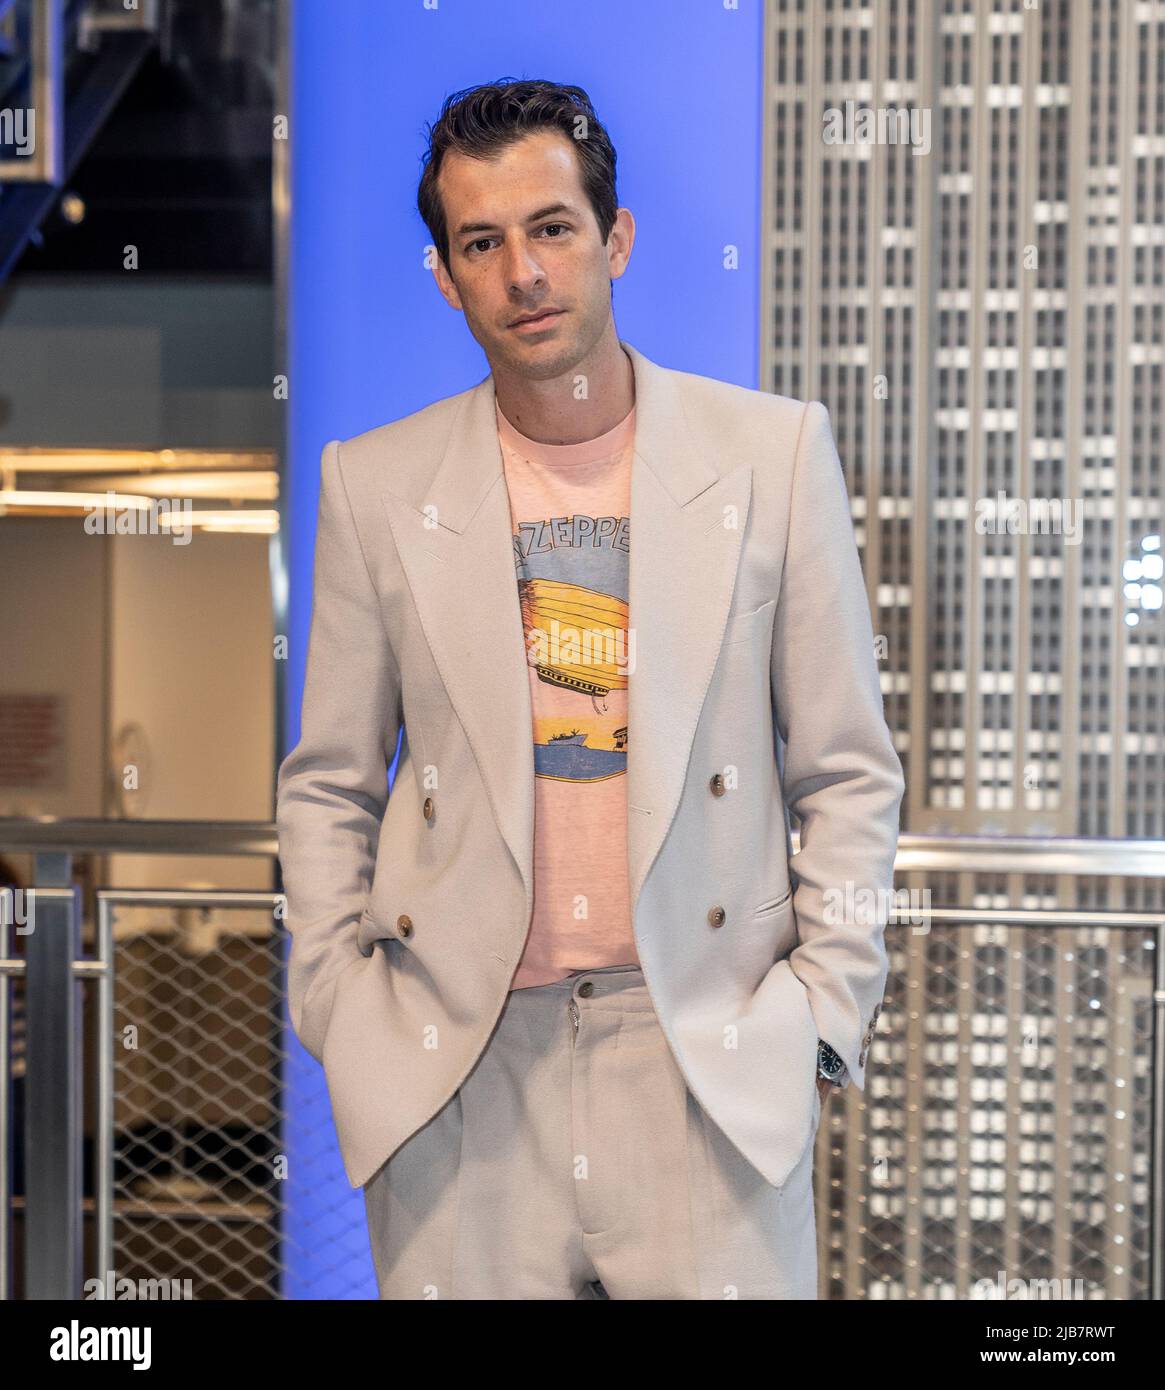 DJ Mark Ronson visits the iconic Empire State Building to light building in purple and gold to honor the Platinum Jubilee of Queen Elizebeth II in New York on June 3, 2022. (Photo by Lev Radin/Sipa USA) Stock Photo